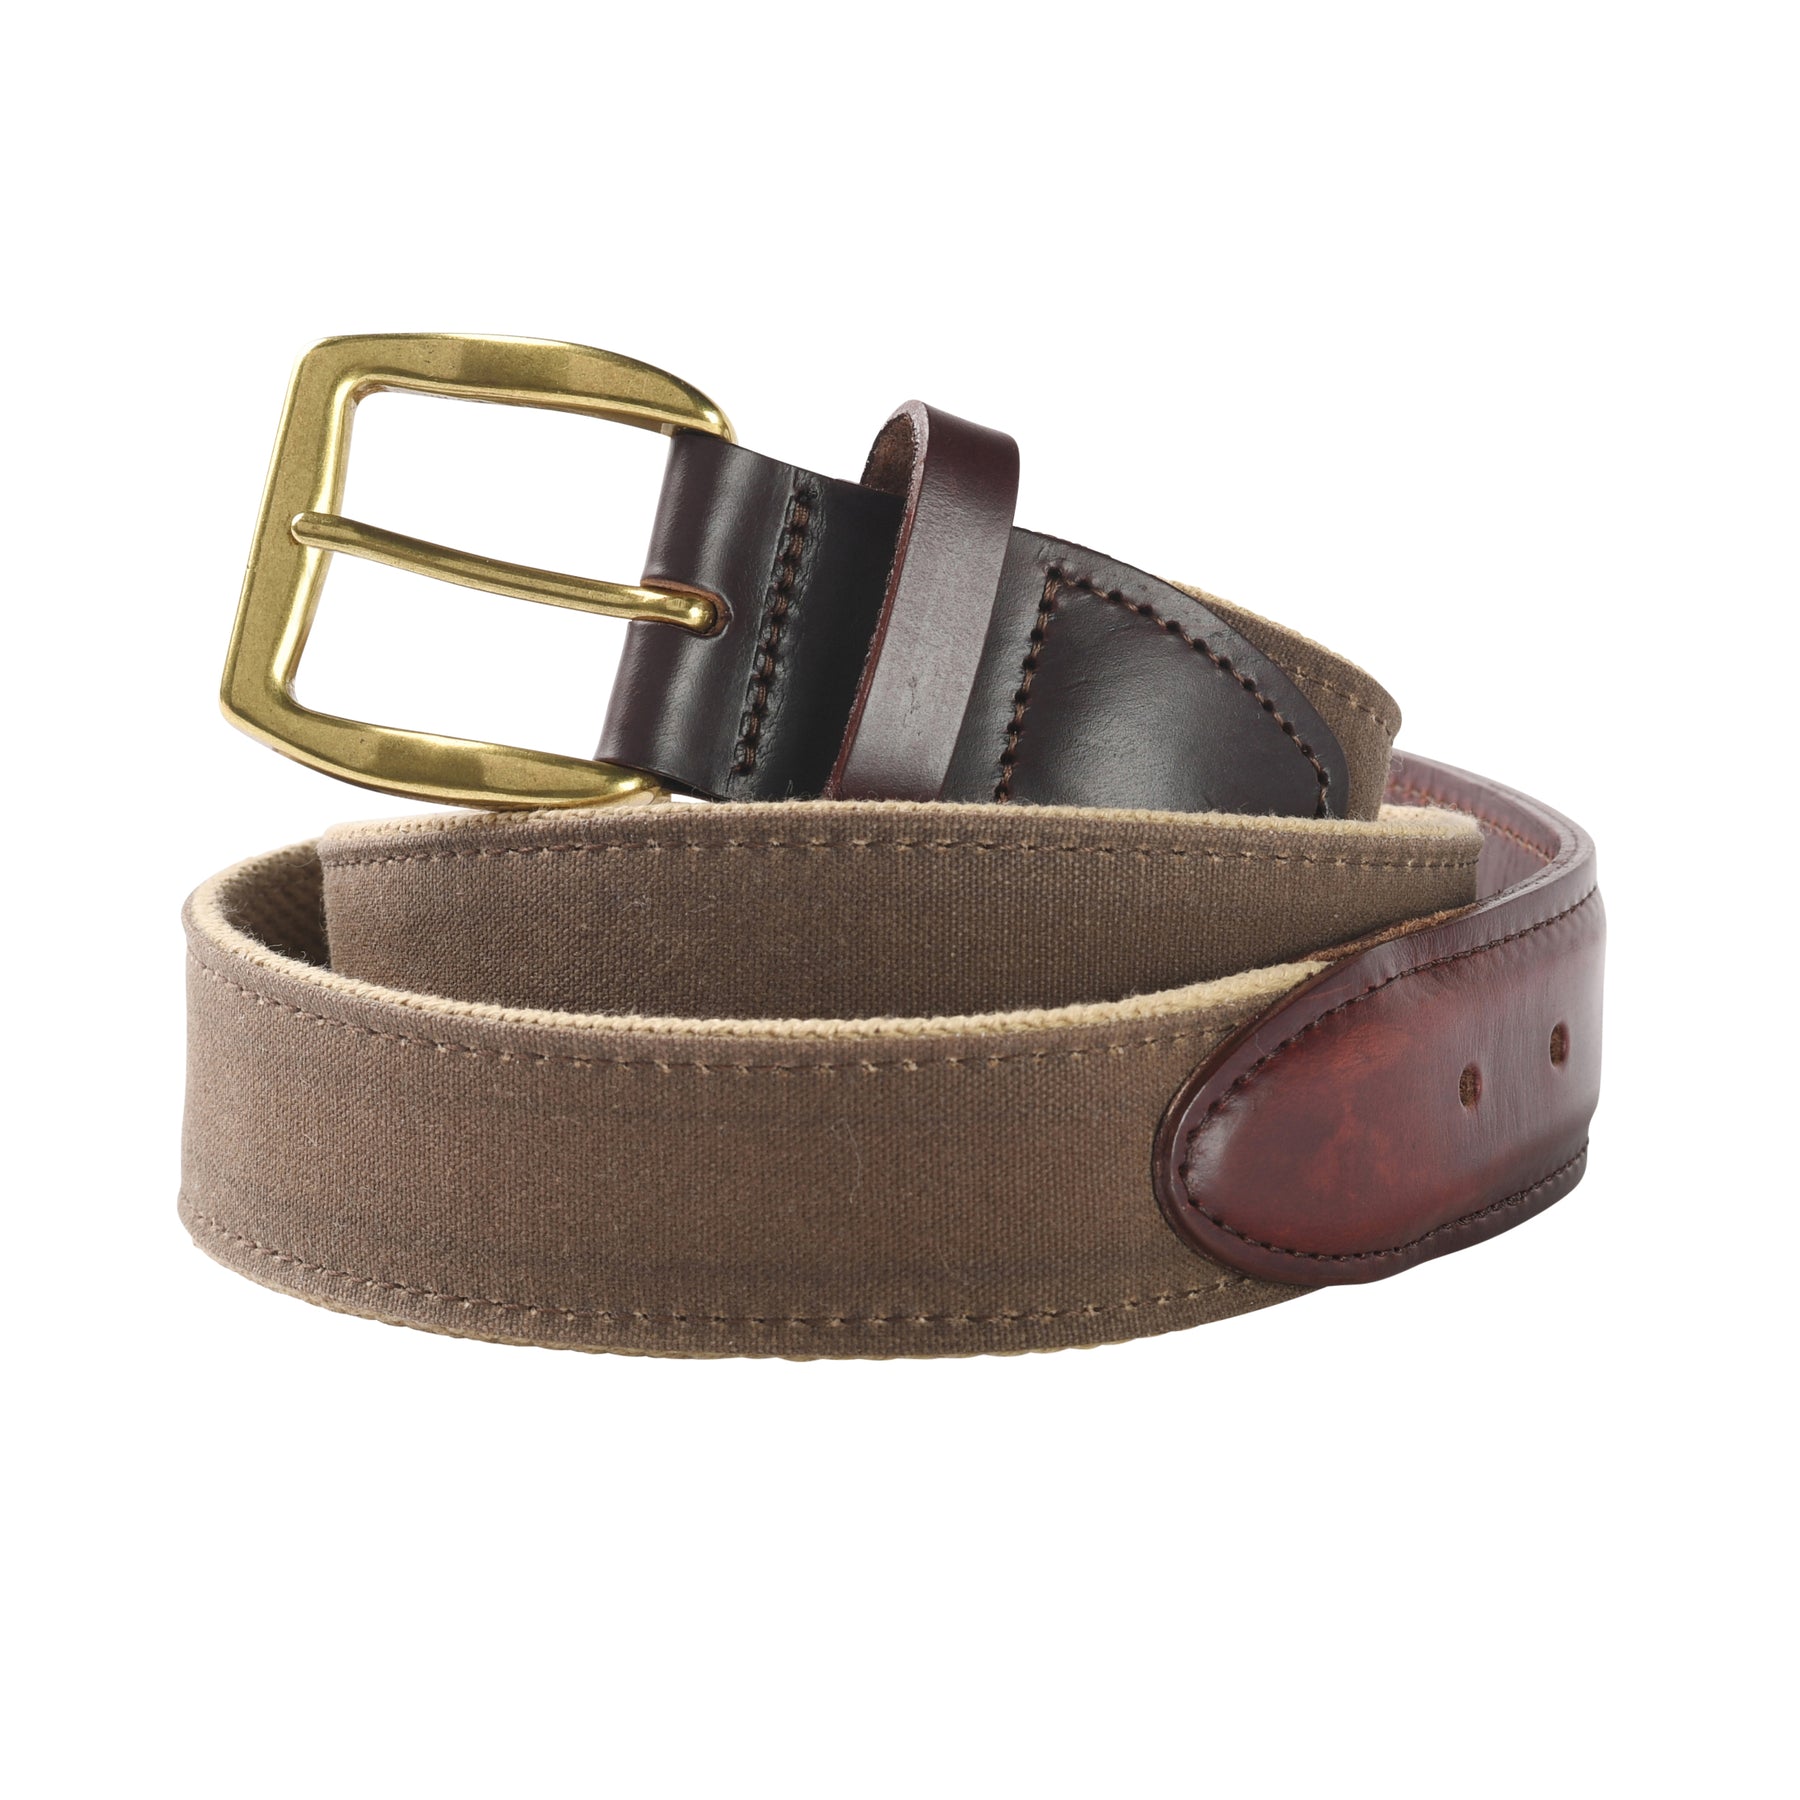 NETWORK Leather Belt with Pin-Buckle Closure For Men (Brown, 36)